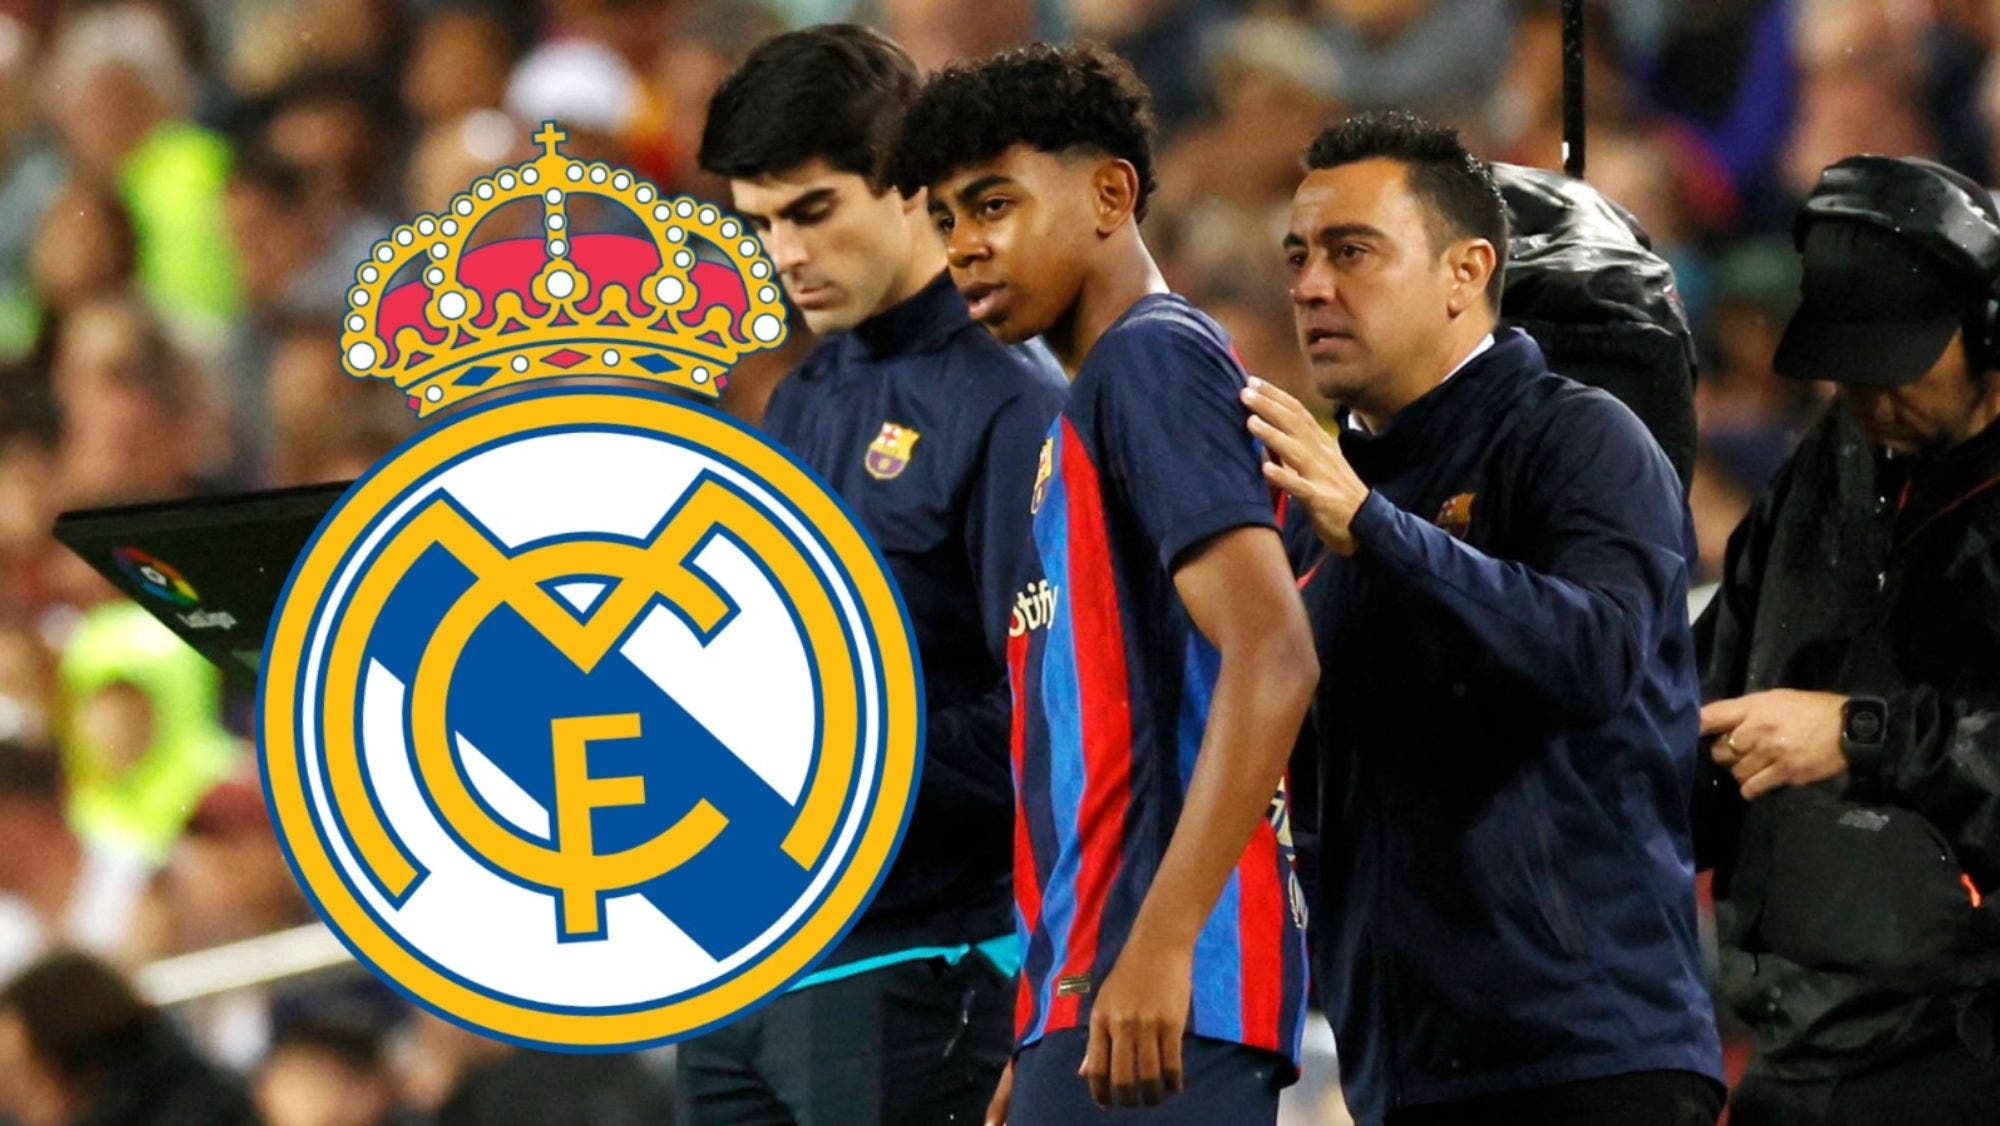 An ace up Real Madrid's sleeve to prevent Lamine Yamal's extension
	

